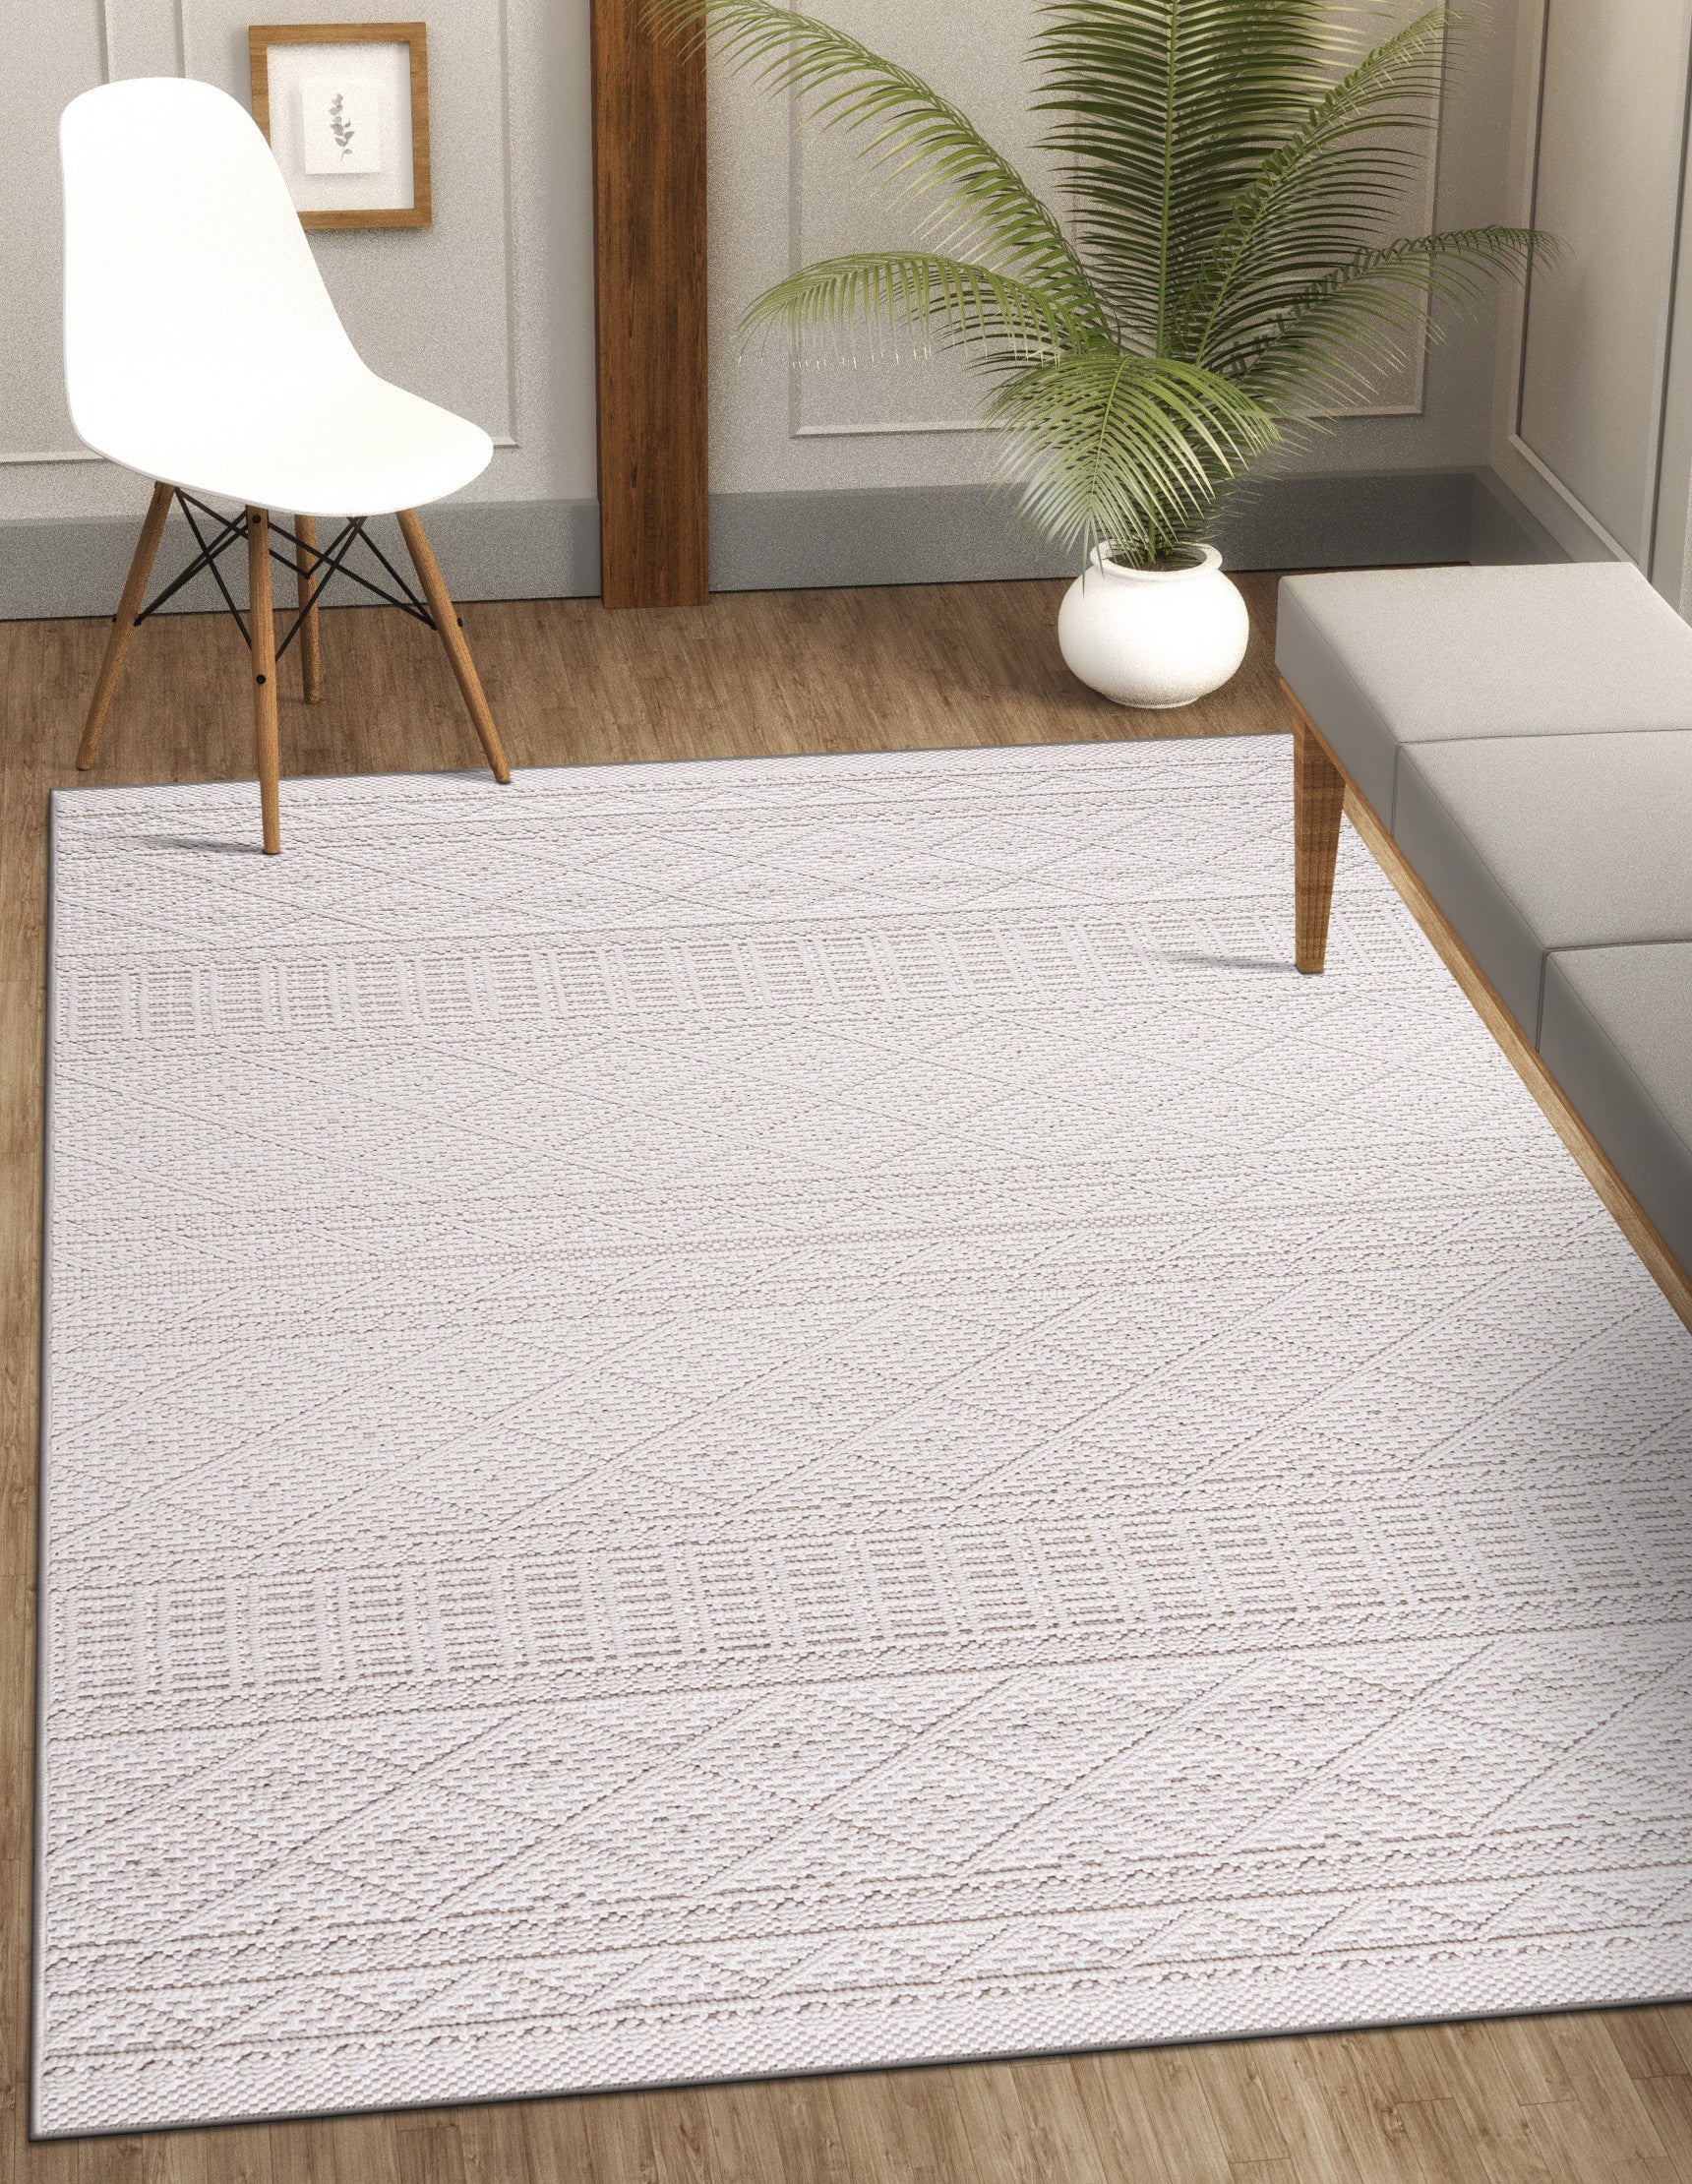 Micro Loop Area Rugs  GY4 - White / Gray